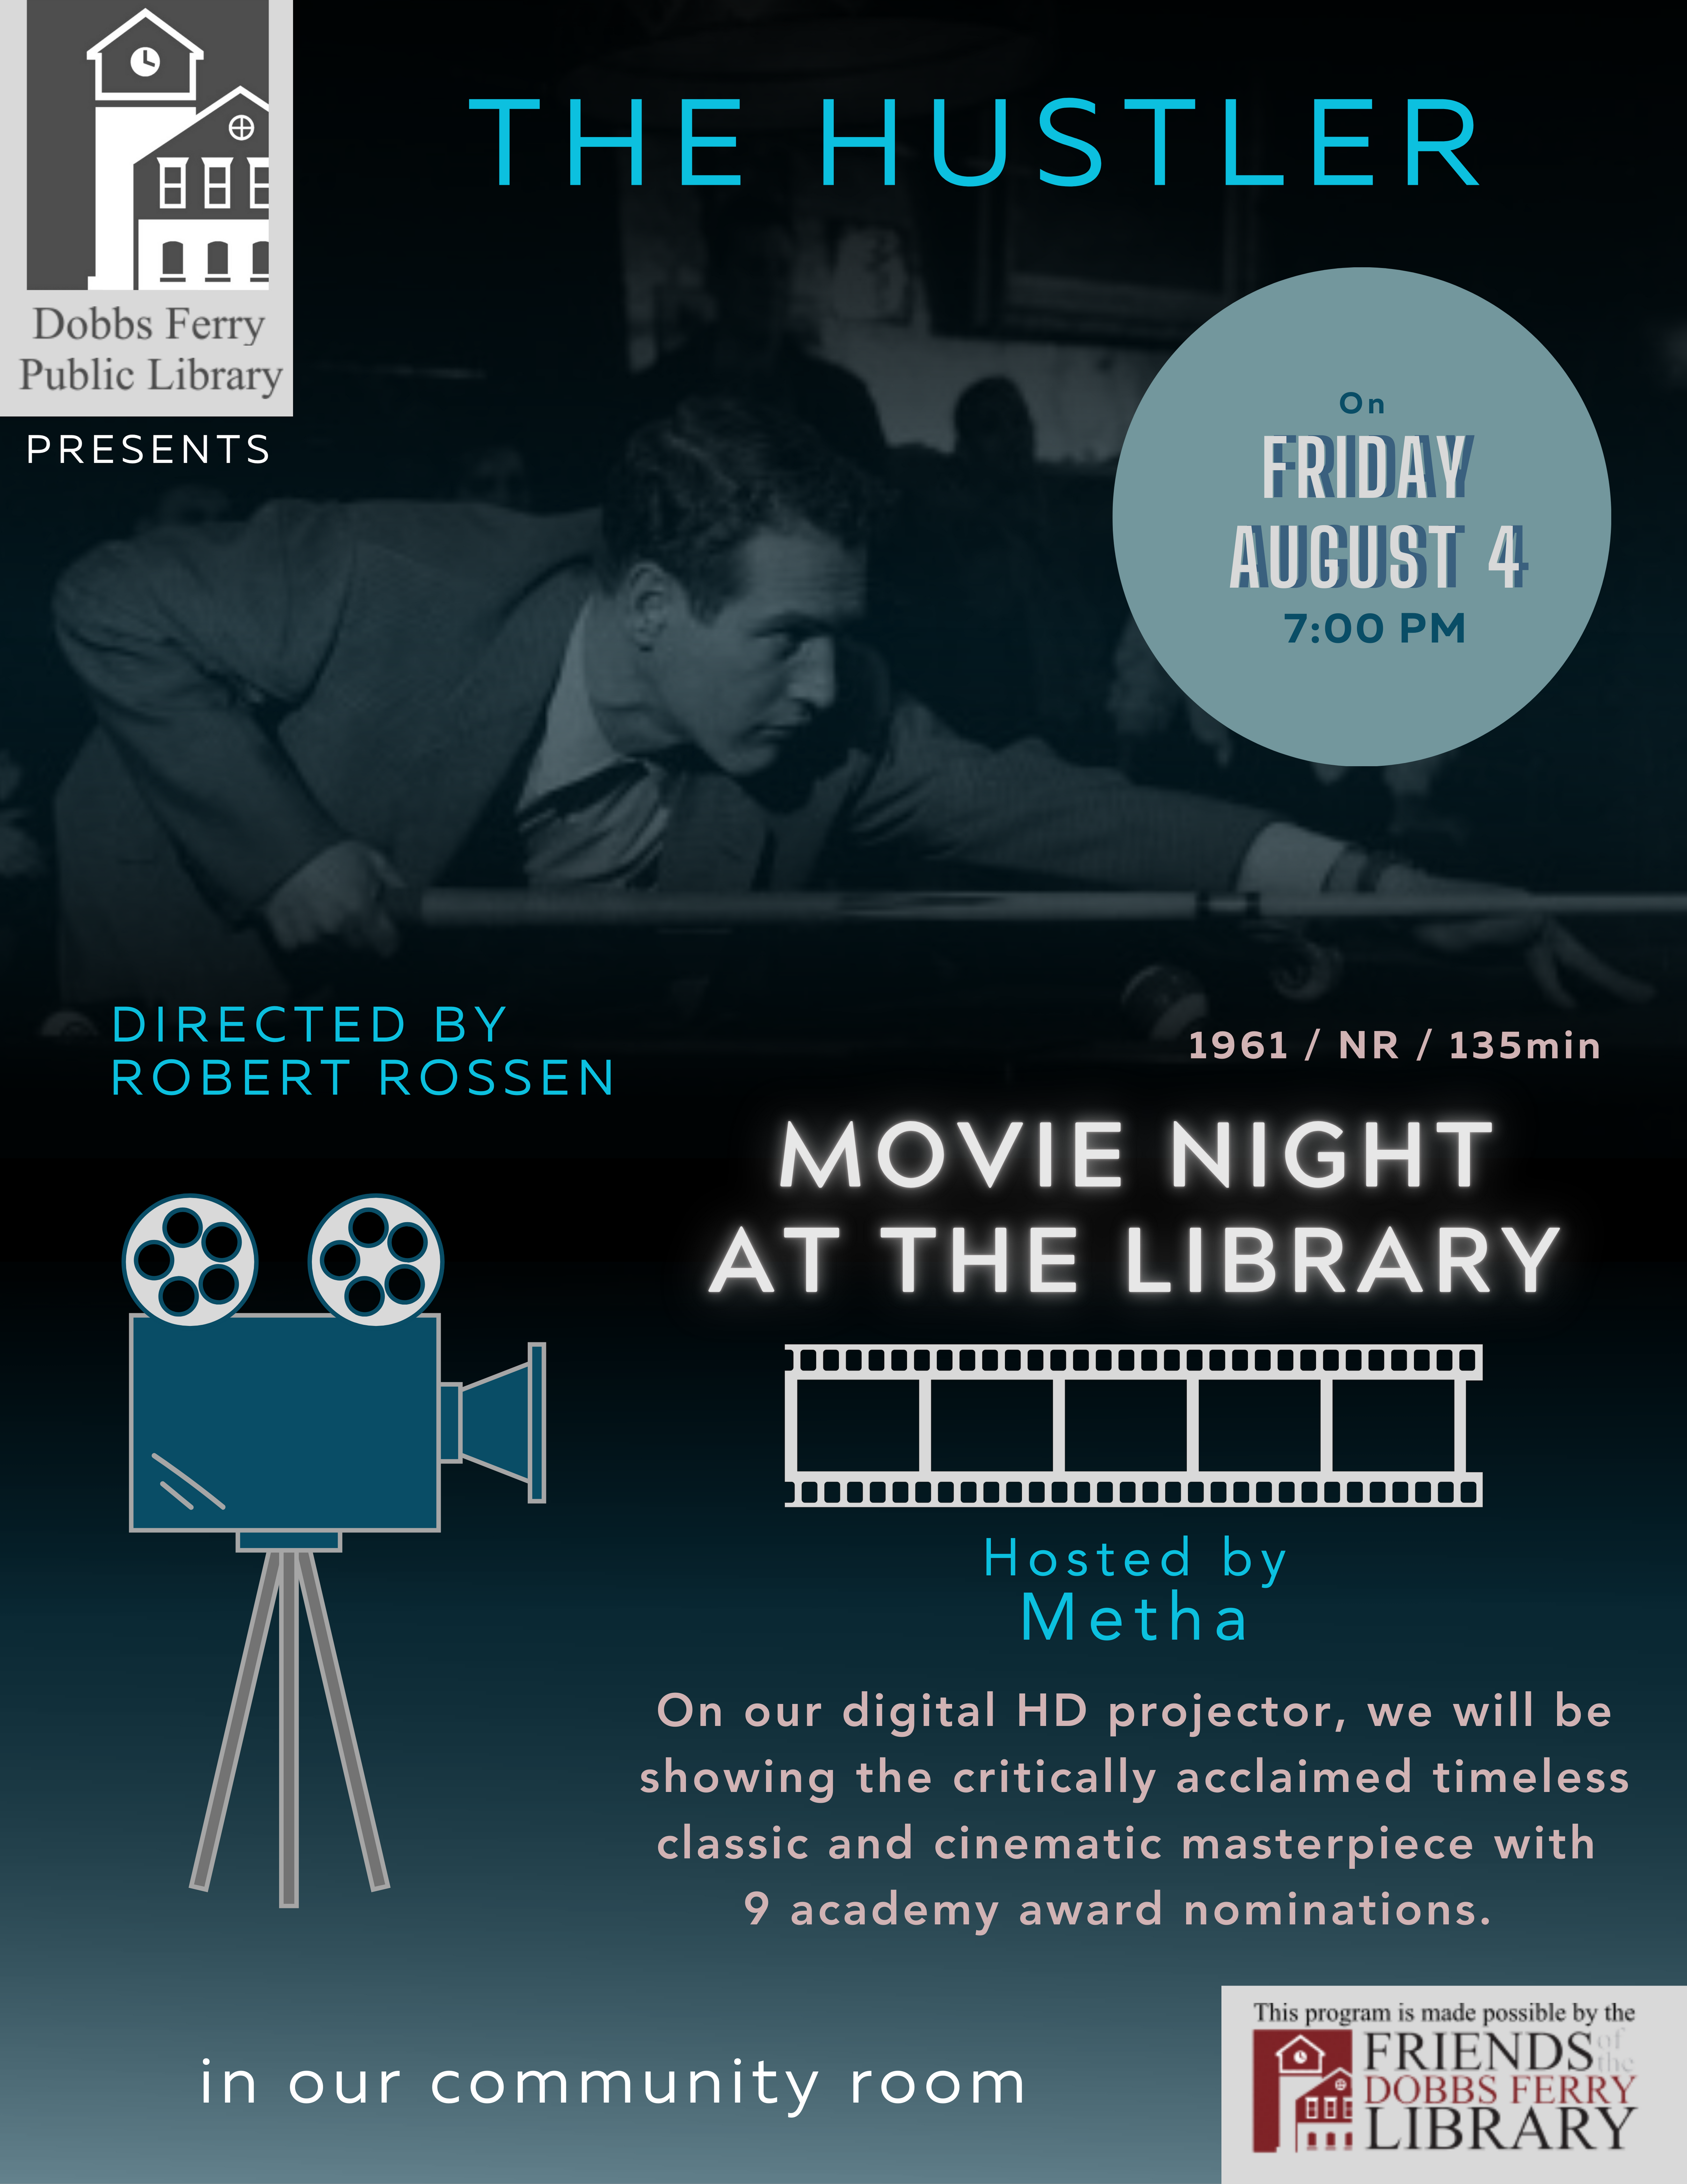 Movie Night at the Library: "The Hustler"